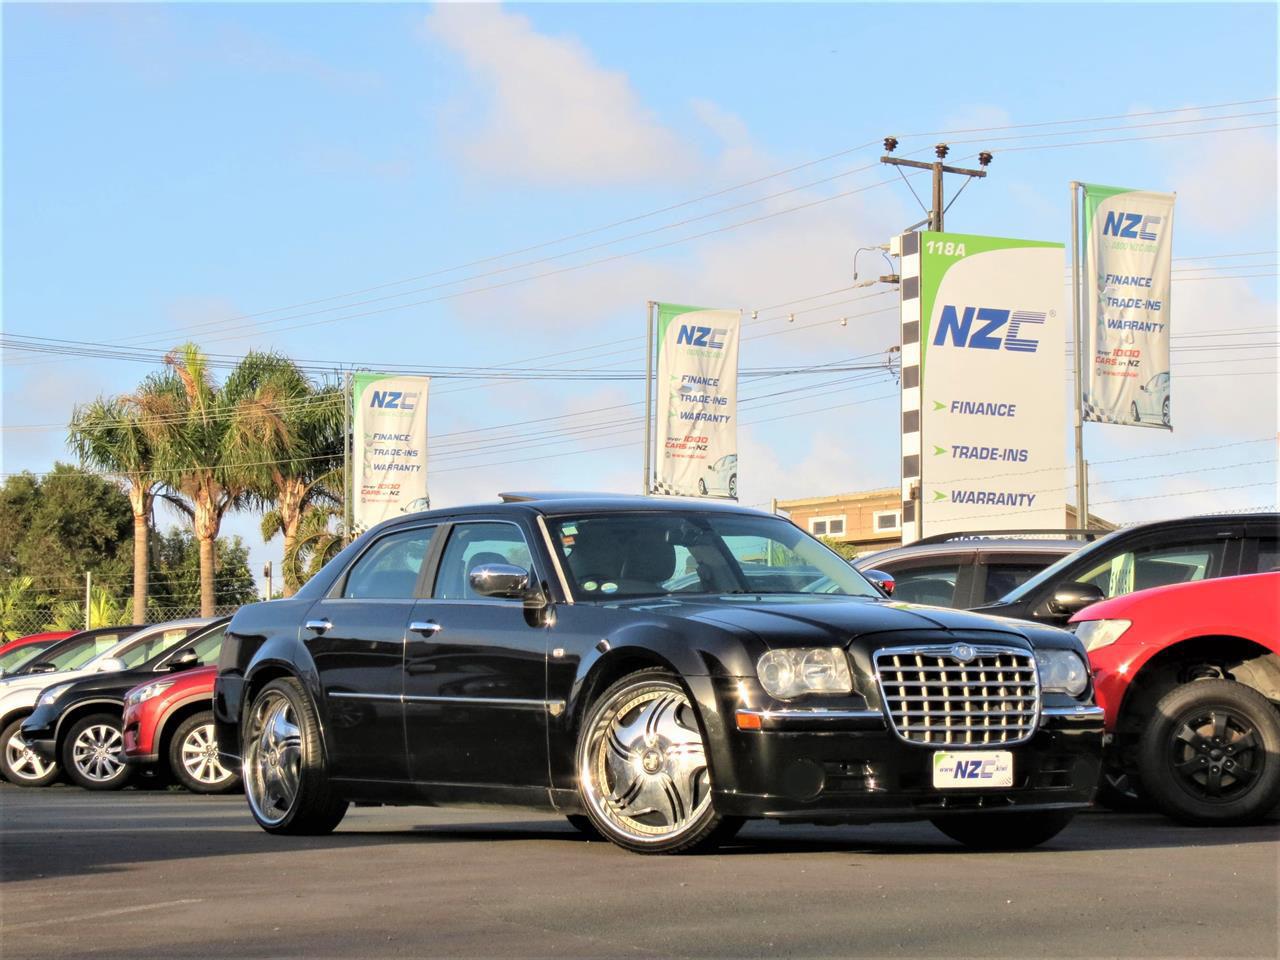 NZC 2008 Chrysler 300C just arrived to Auckland